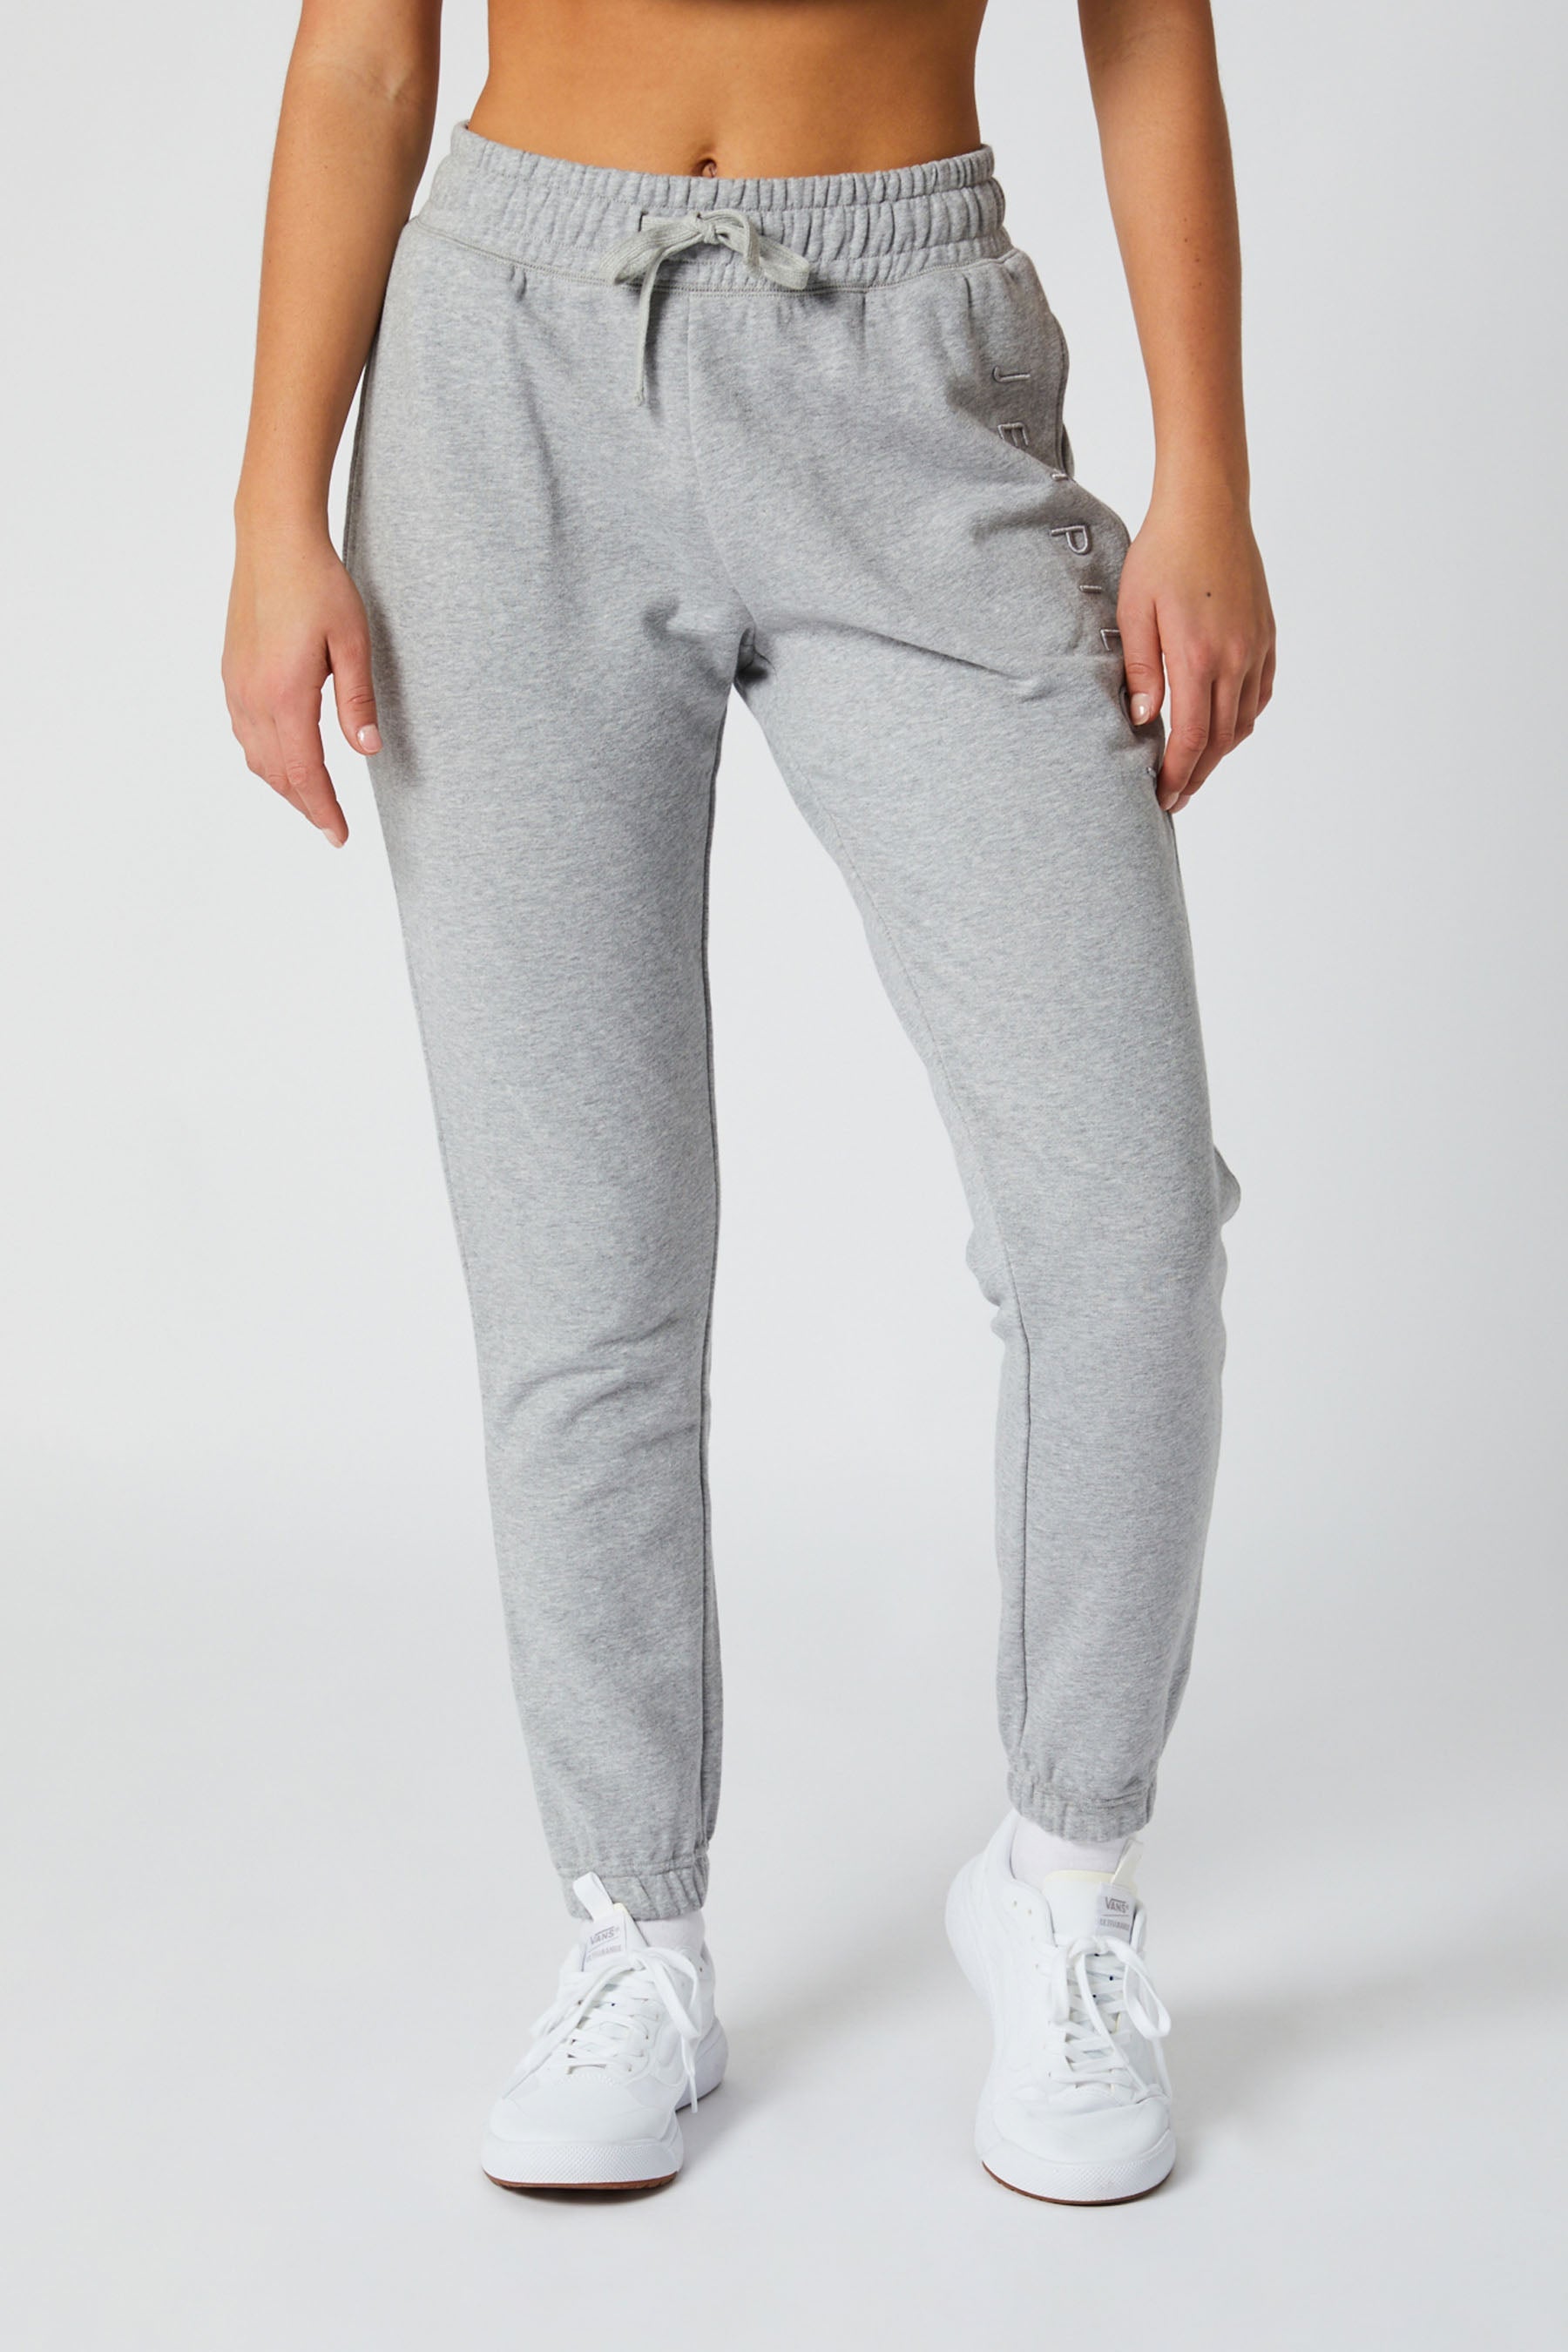 Uniexcosm Womens Sweatpants Jogger Pants Sports Bottoms Activewear Casual  with Pockets - Walmart.com